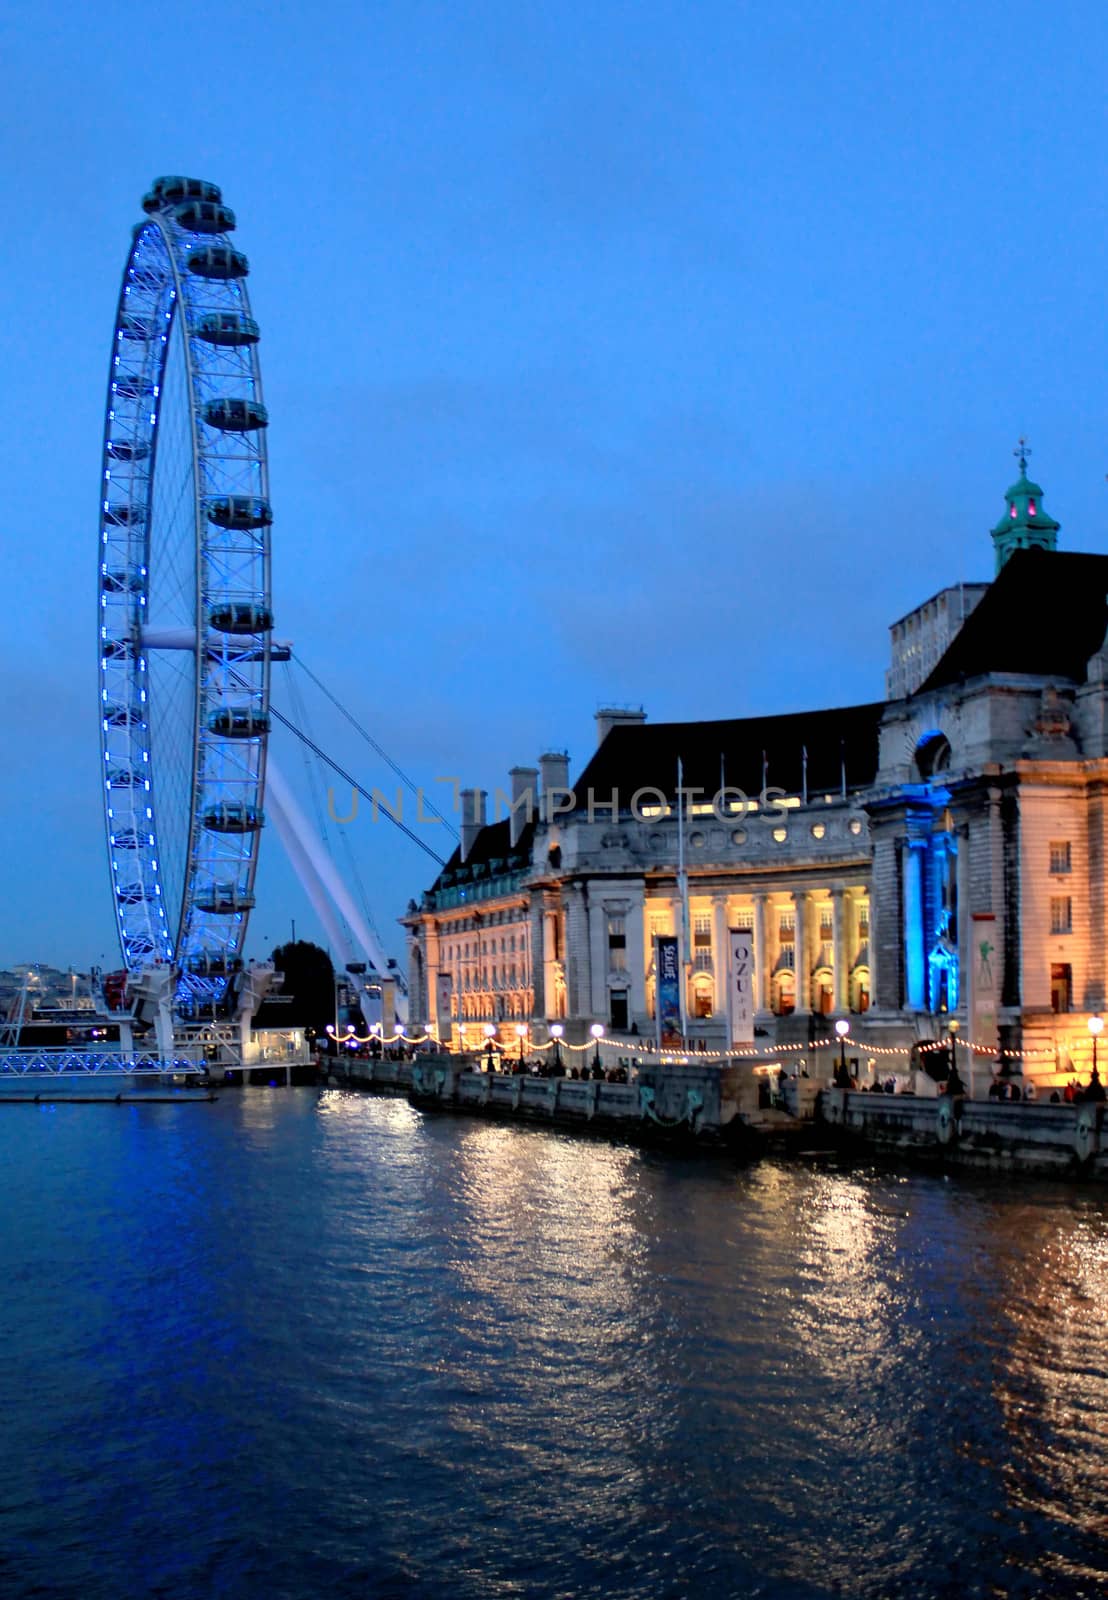 London eye, famous Britain capital attraction 